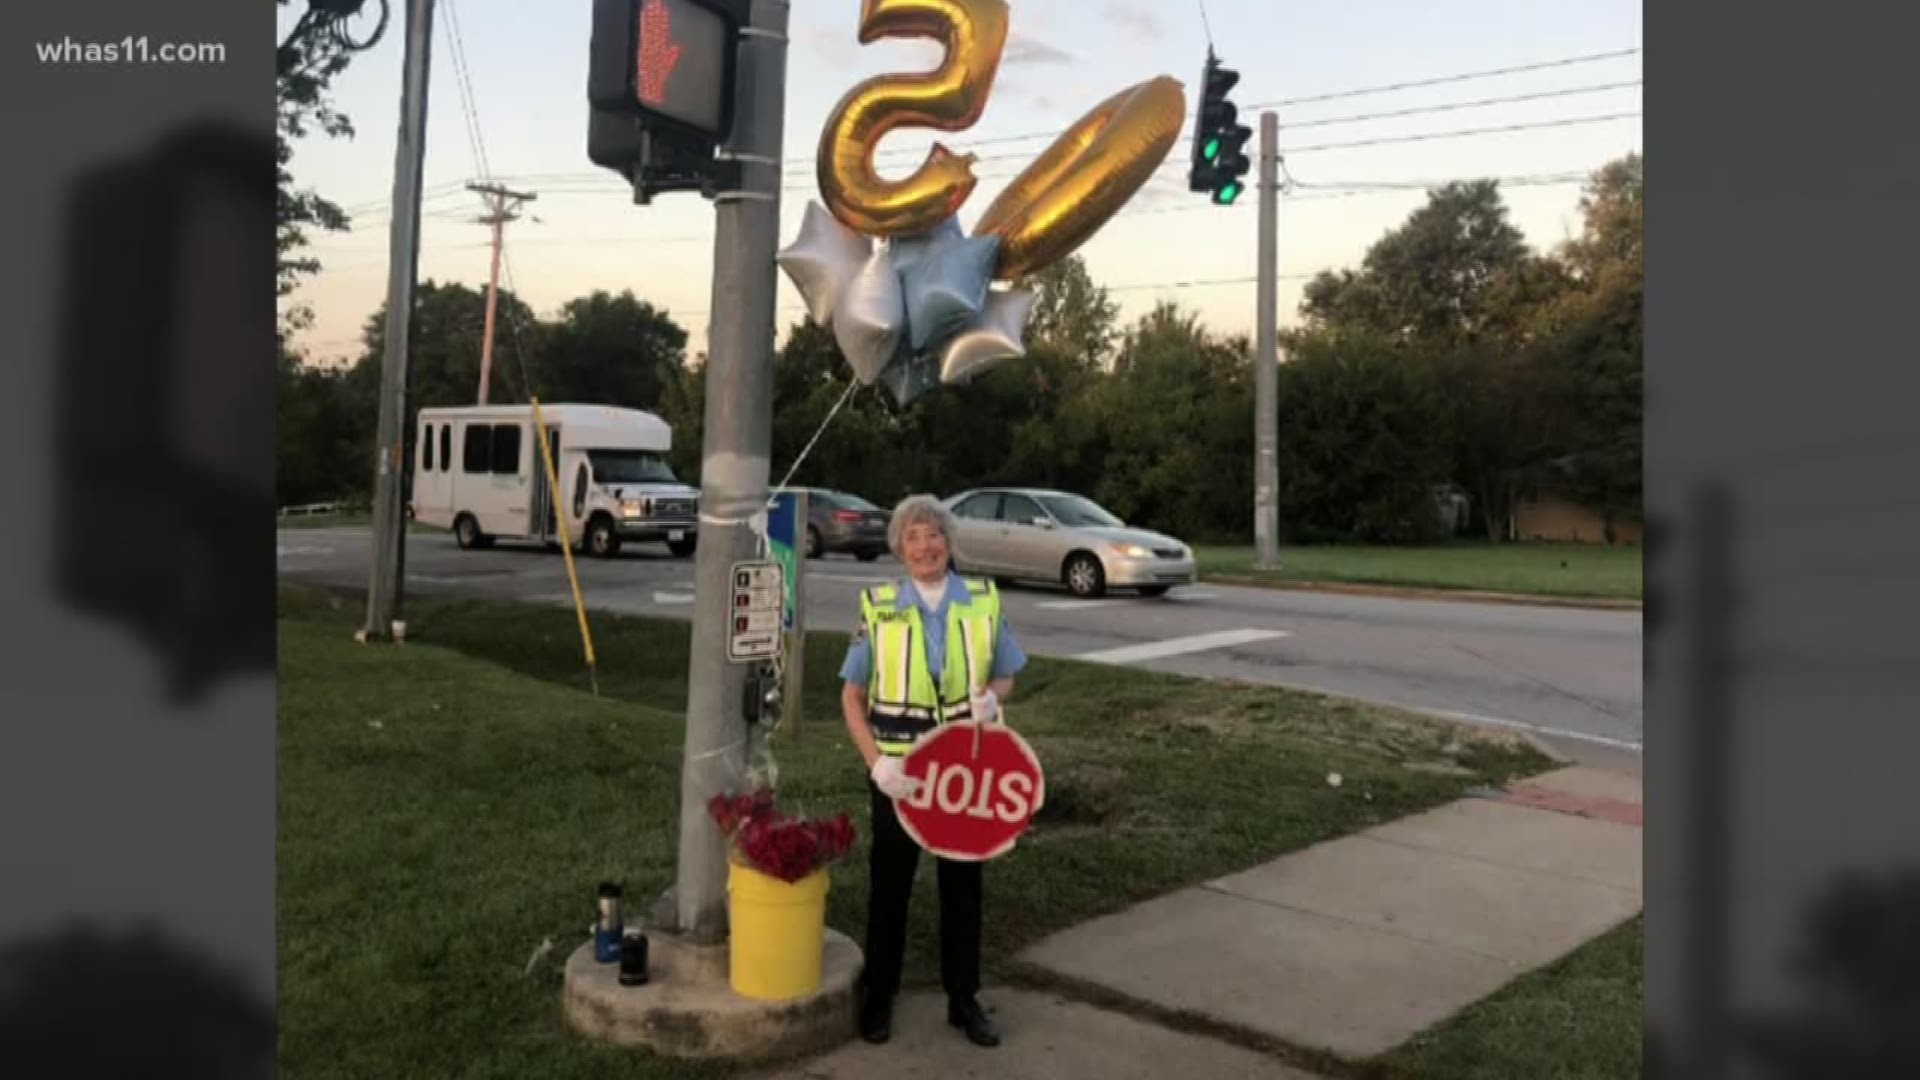 Today marks a major milestone for a local crossing guard, 50 years on the job.